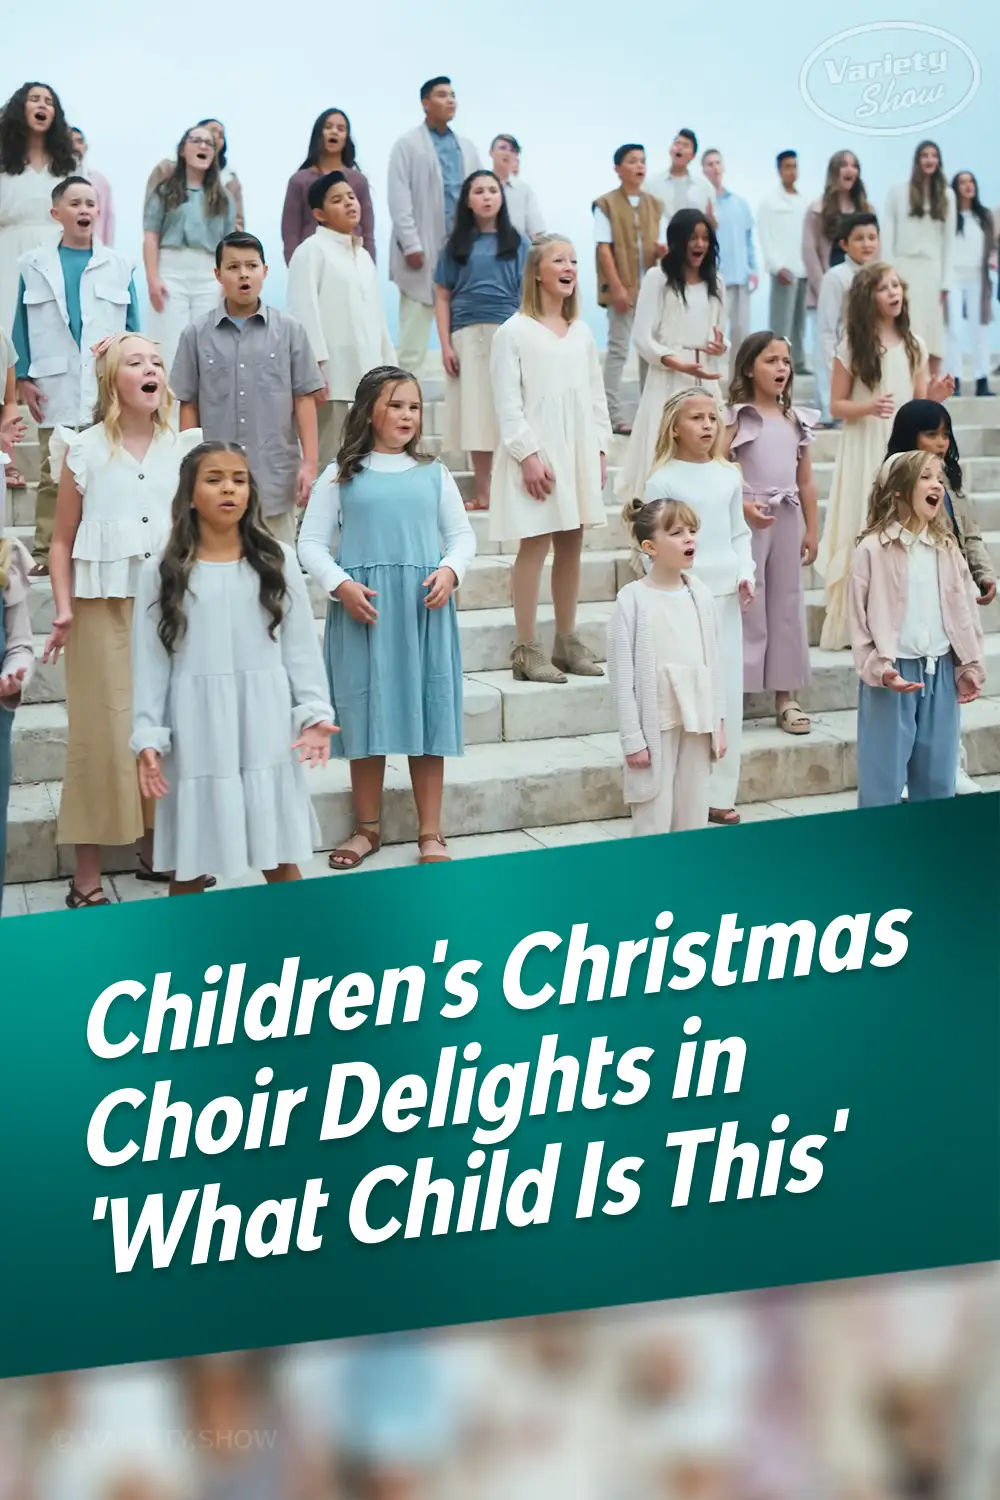 Children\'s Christmas Choir Delights in \'What Child Is This\'